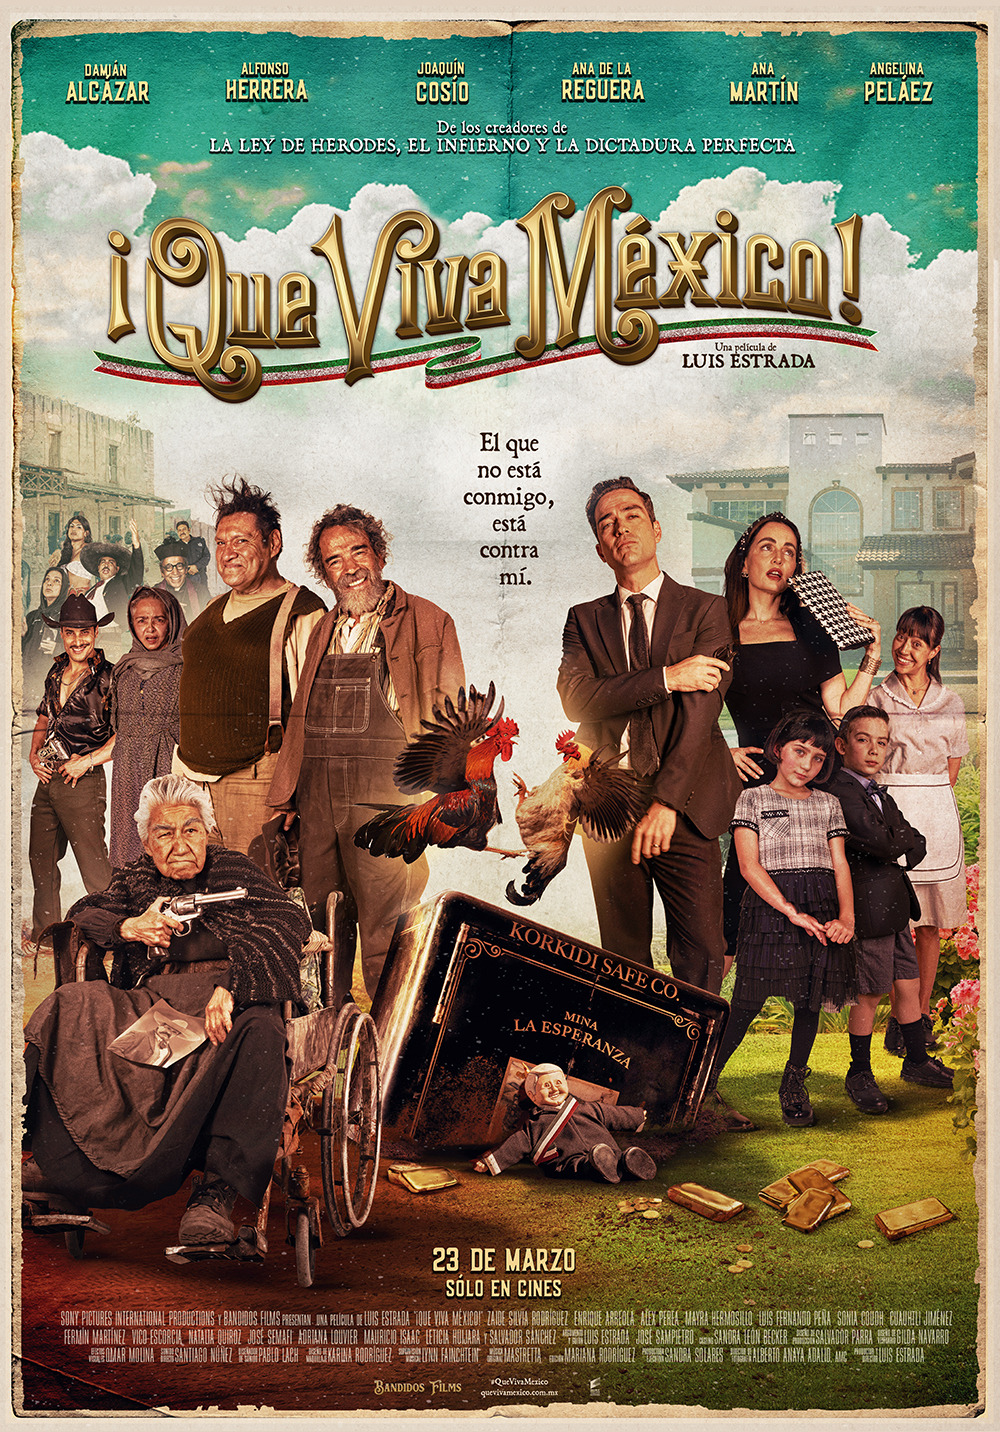 Extra Large Movie Poster Image for ¡Que viva México! (#22 of 27)